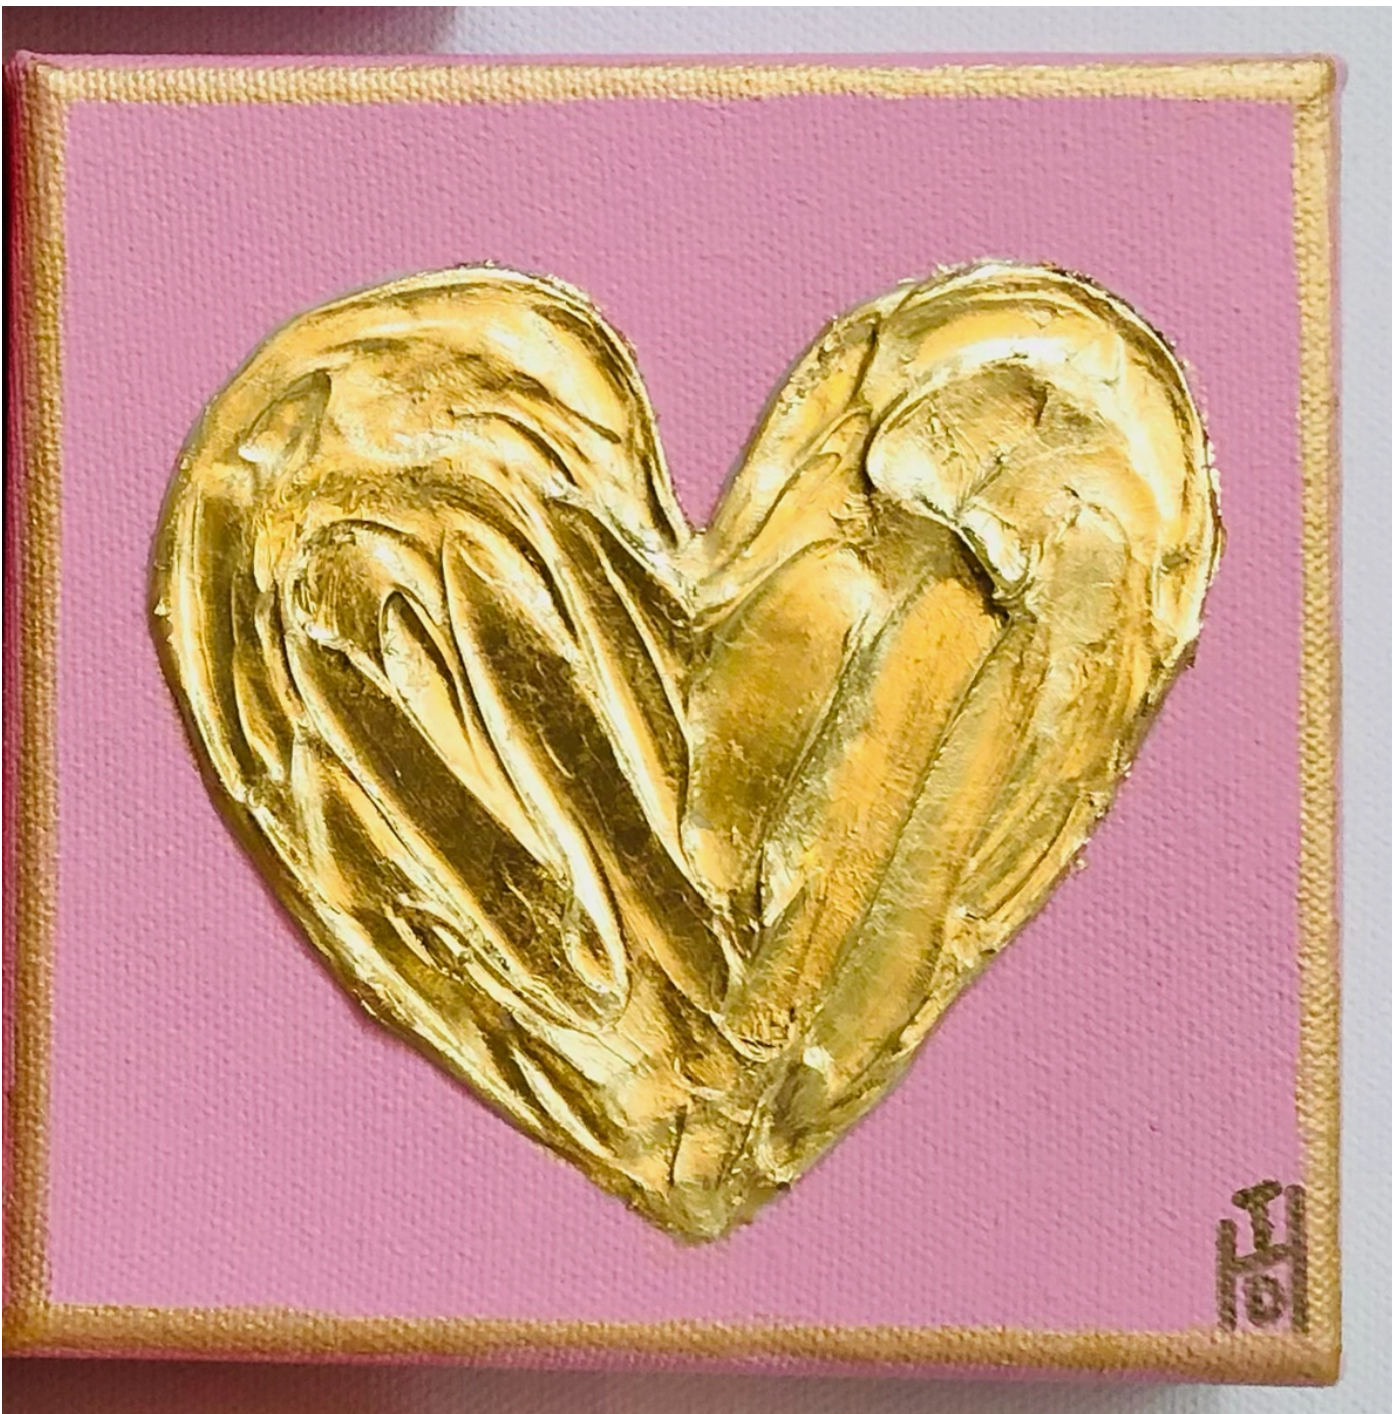  Heart Painting